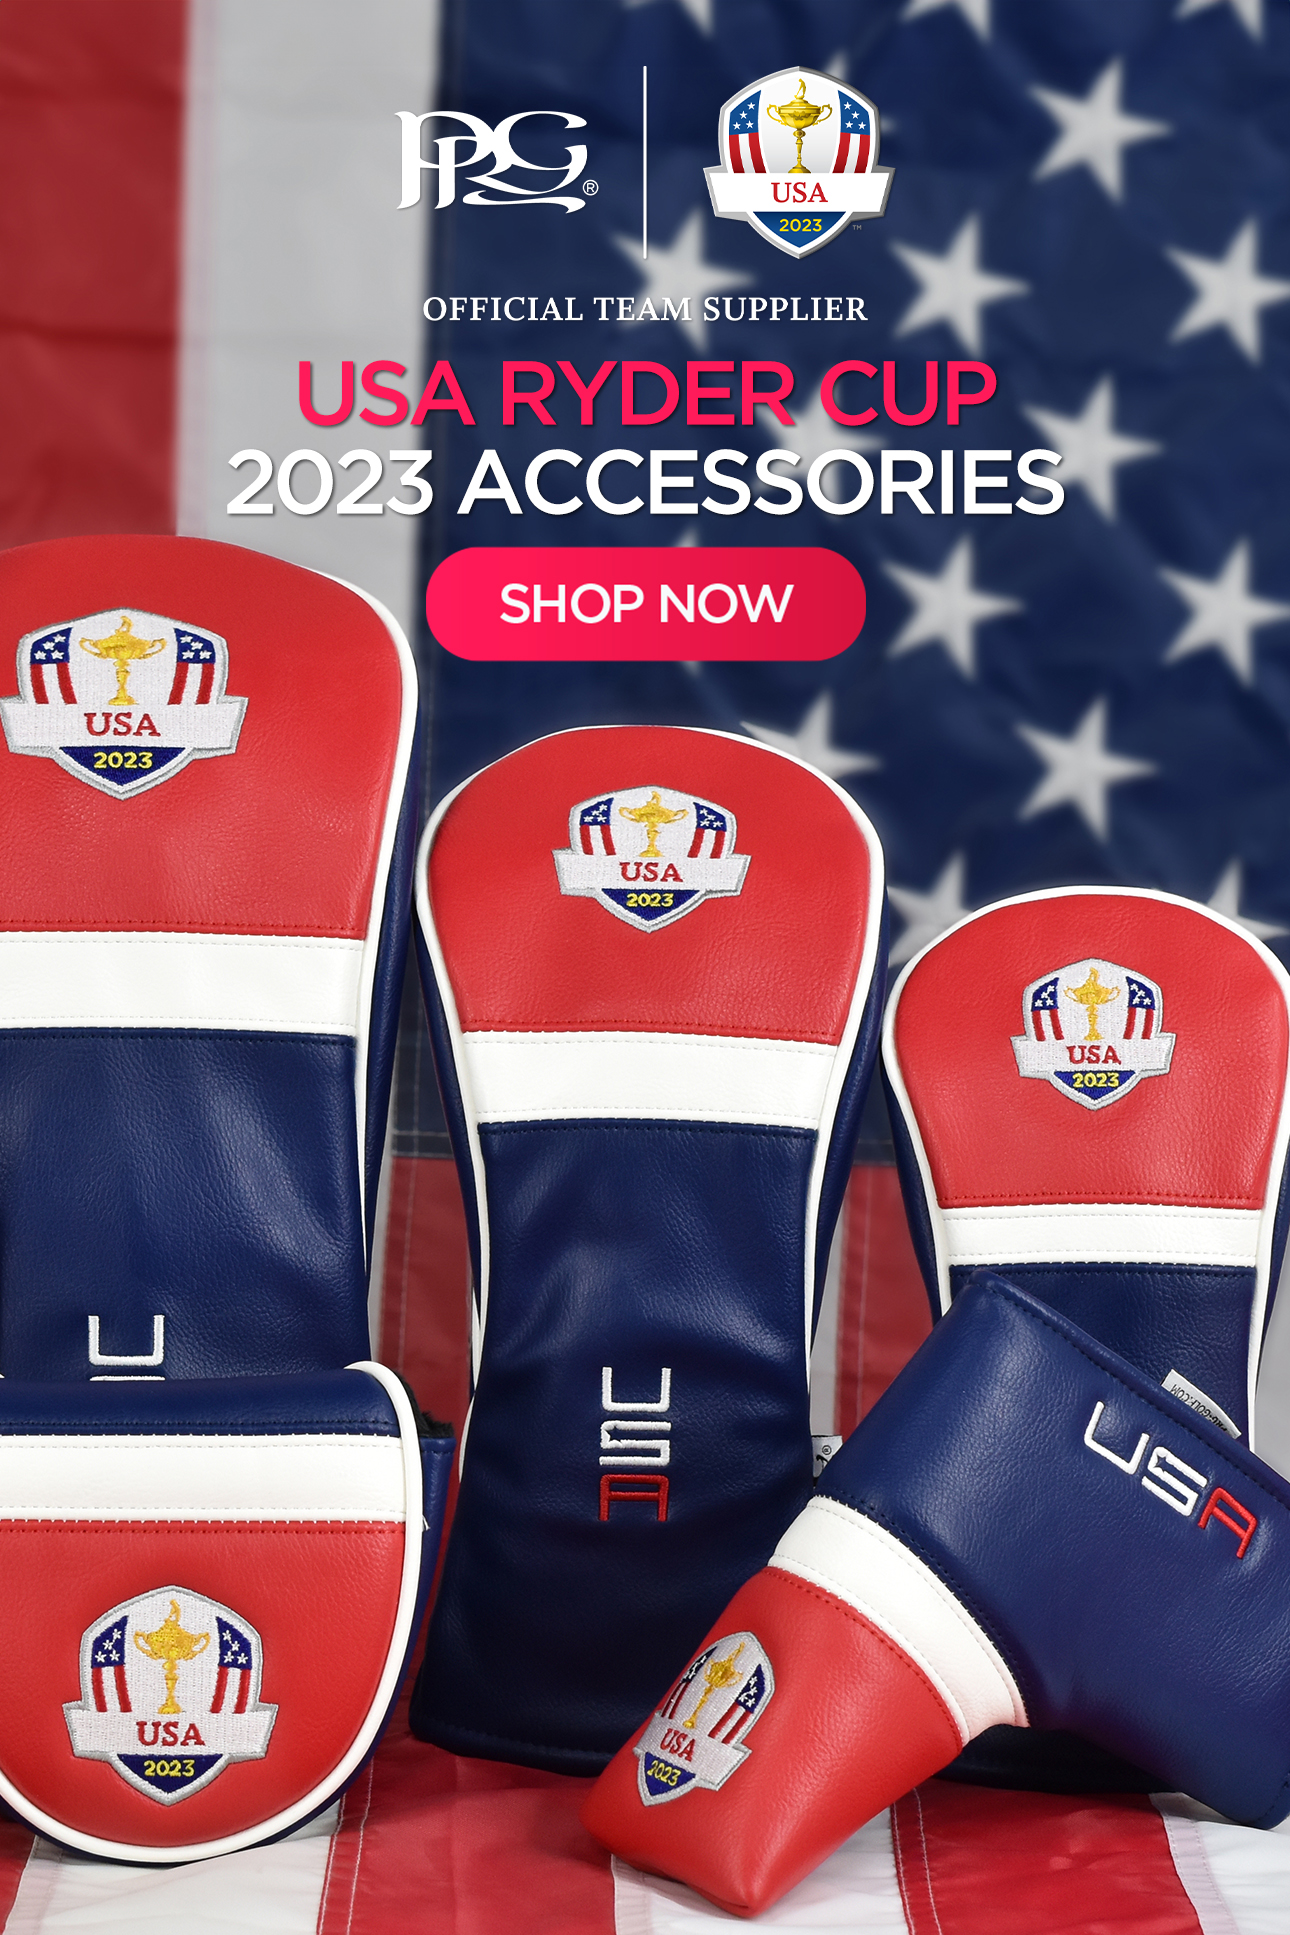 https://prg-golf.com/product-category/shop/2020-u-s-ryder-cup-team-official-accessories/2023-ryder-cup/